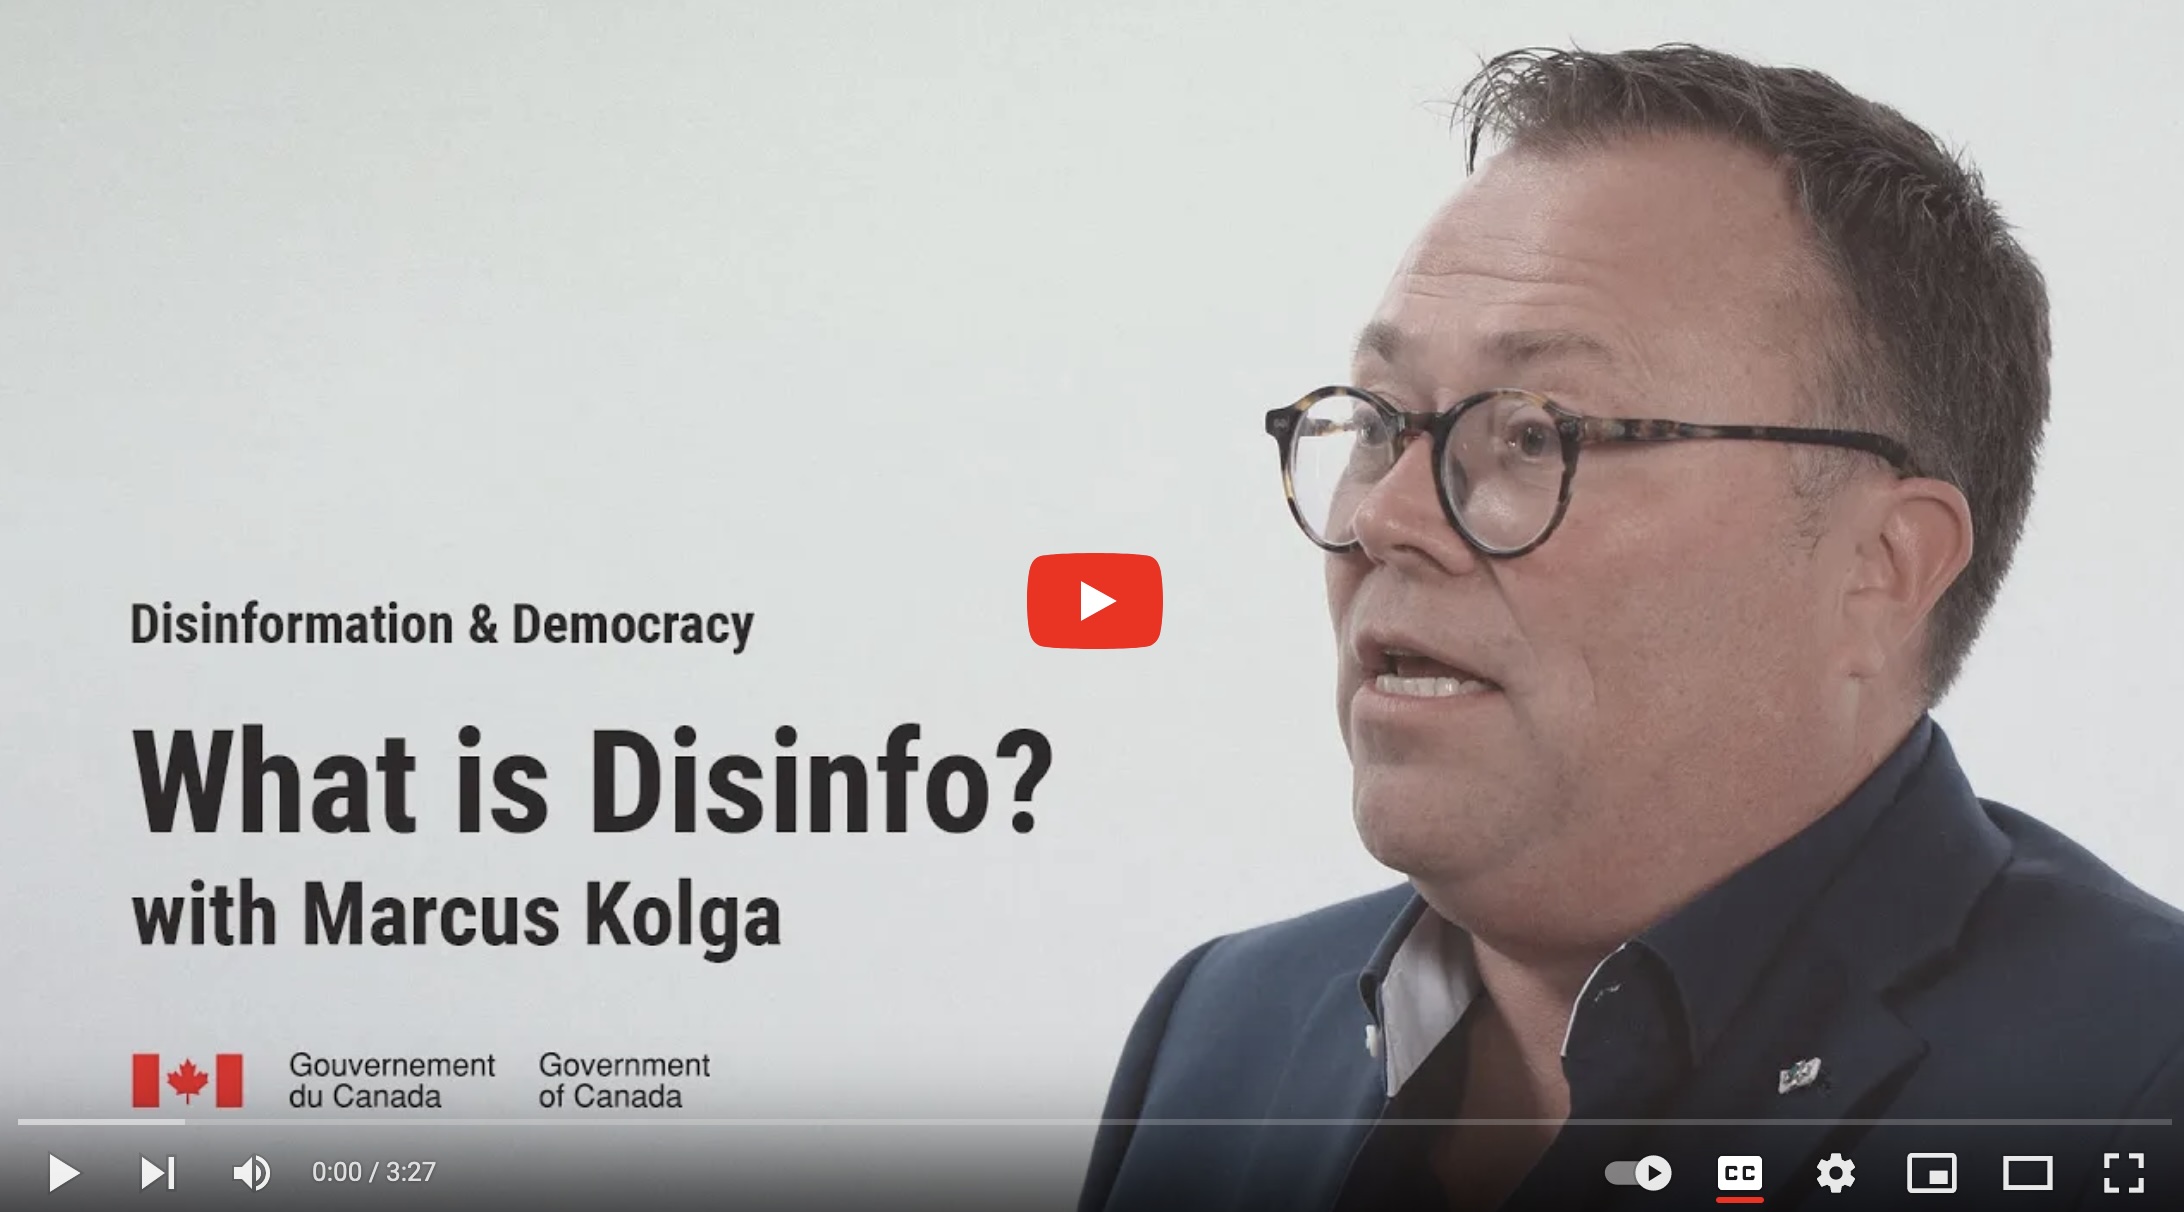 DisinfoWatch Featured in Global Affairs Canada Series About Disinfo